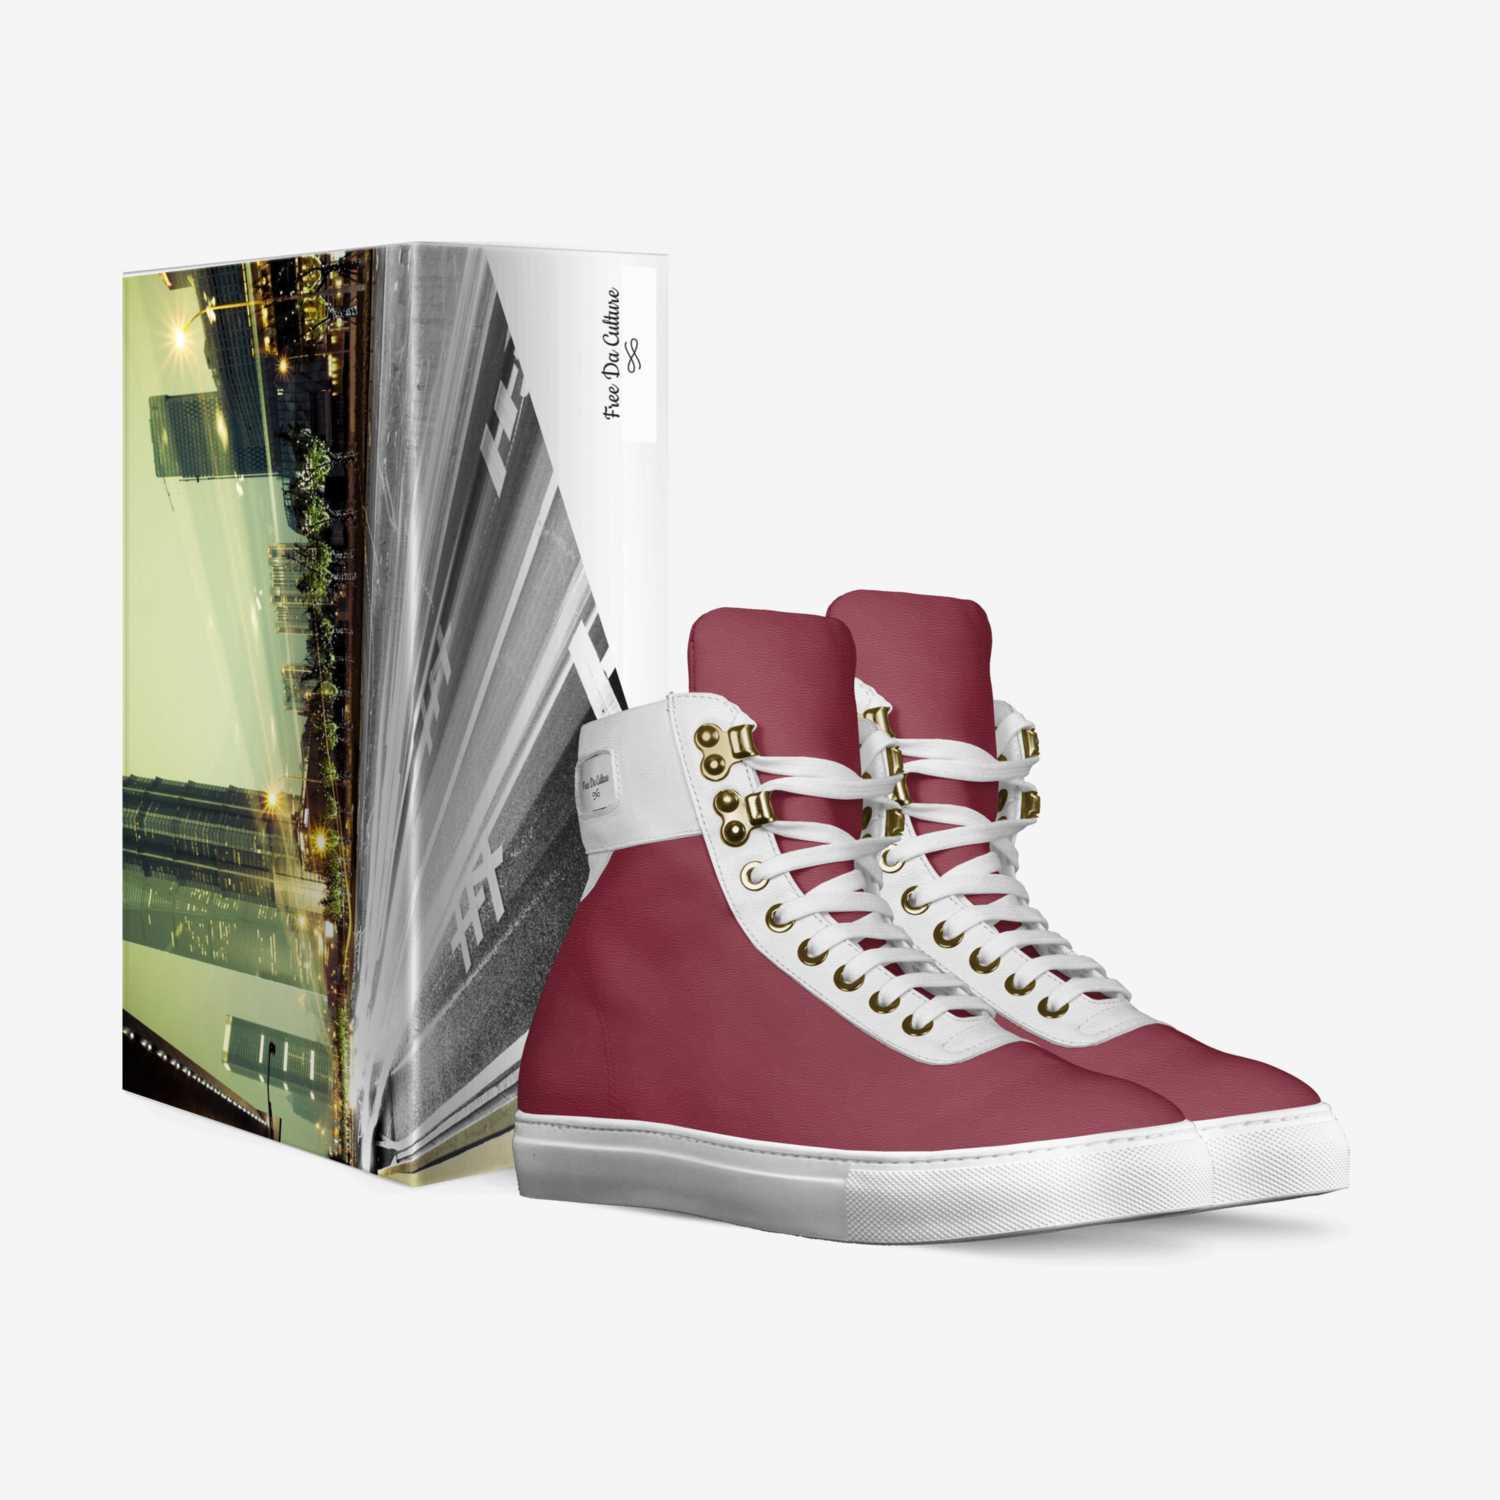 Free Da Culture custom made in Italy shoes by Benjamin Mejia | Box view